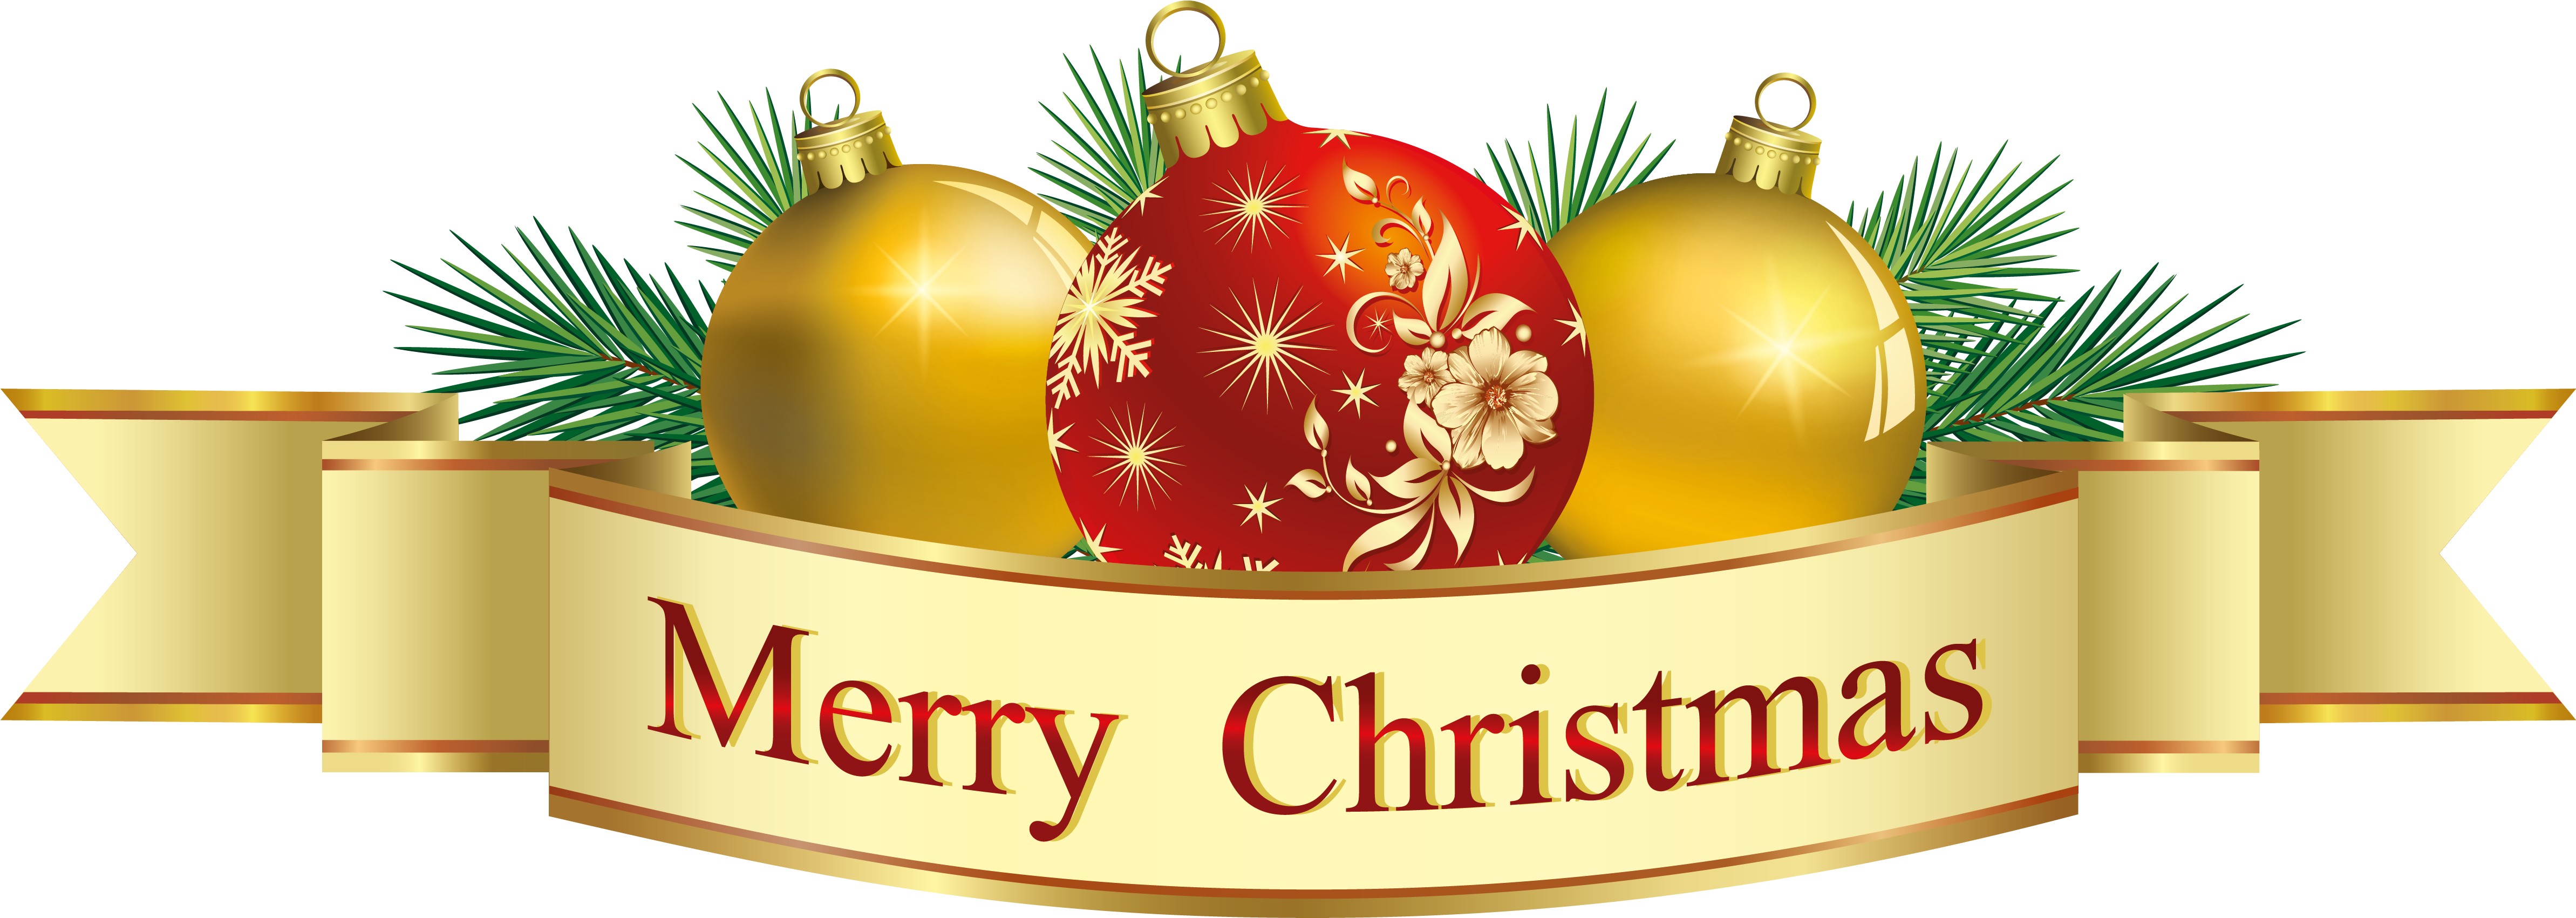 Download Merry Christmas Clip Art Png Image With No Background Pngkey Com